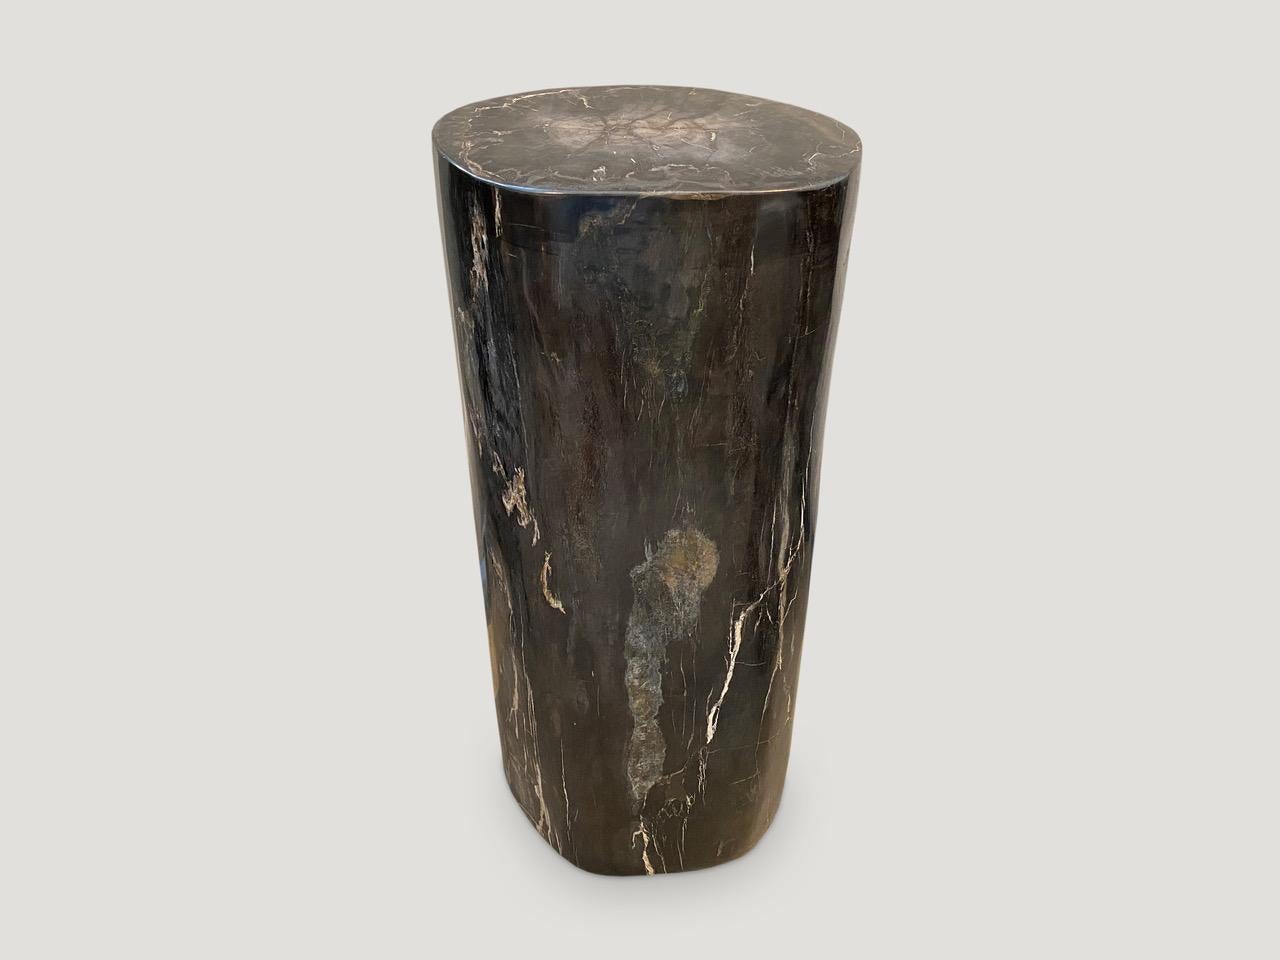 Impressive super smooth high quality petrified wood pedestal or side table. It’s fascinating how Mother Nature produces these exquisite 40 million year old petrified teak logs with such contrasting colors and natural patterns throughout. Modern yet